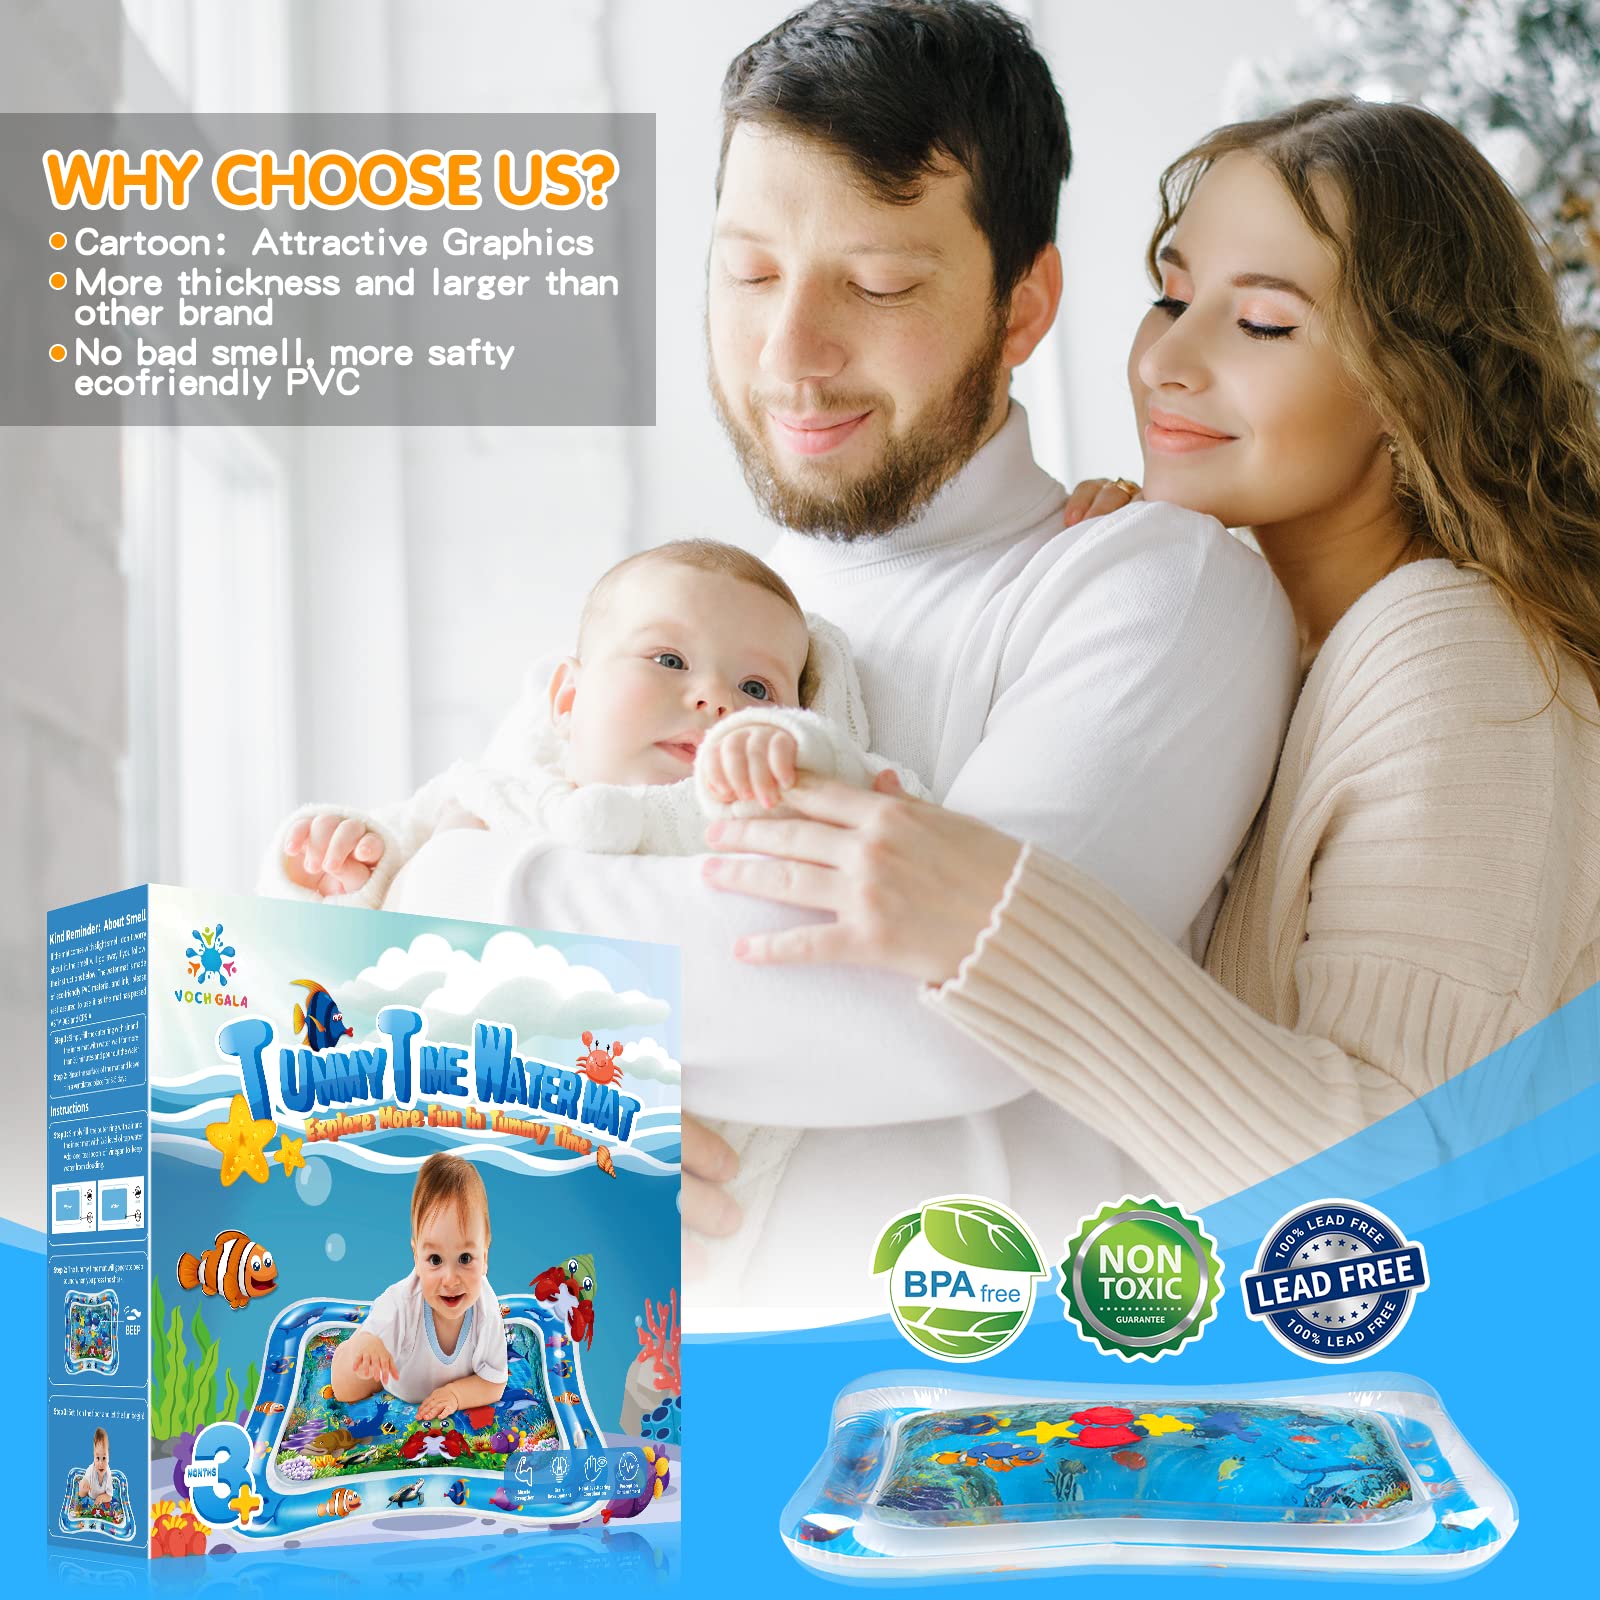 VOCH GALA Inflatable Tummy Time Water Mat, Baby Toys for 3 6 9 12 Months Infant Boys Girls, Ideal Gift for Baby to Meet Milestone